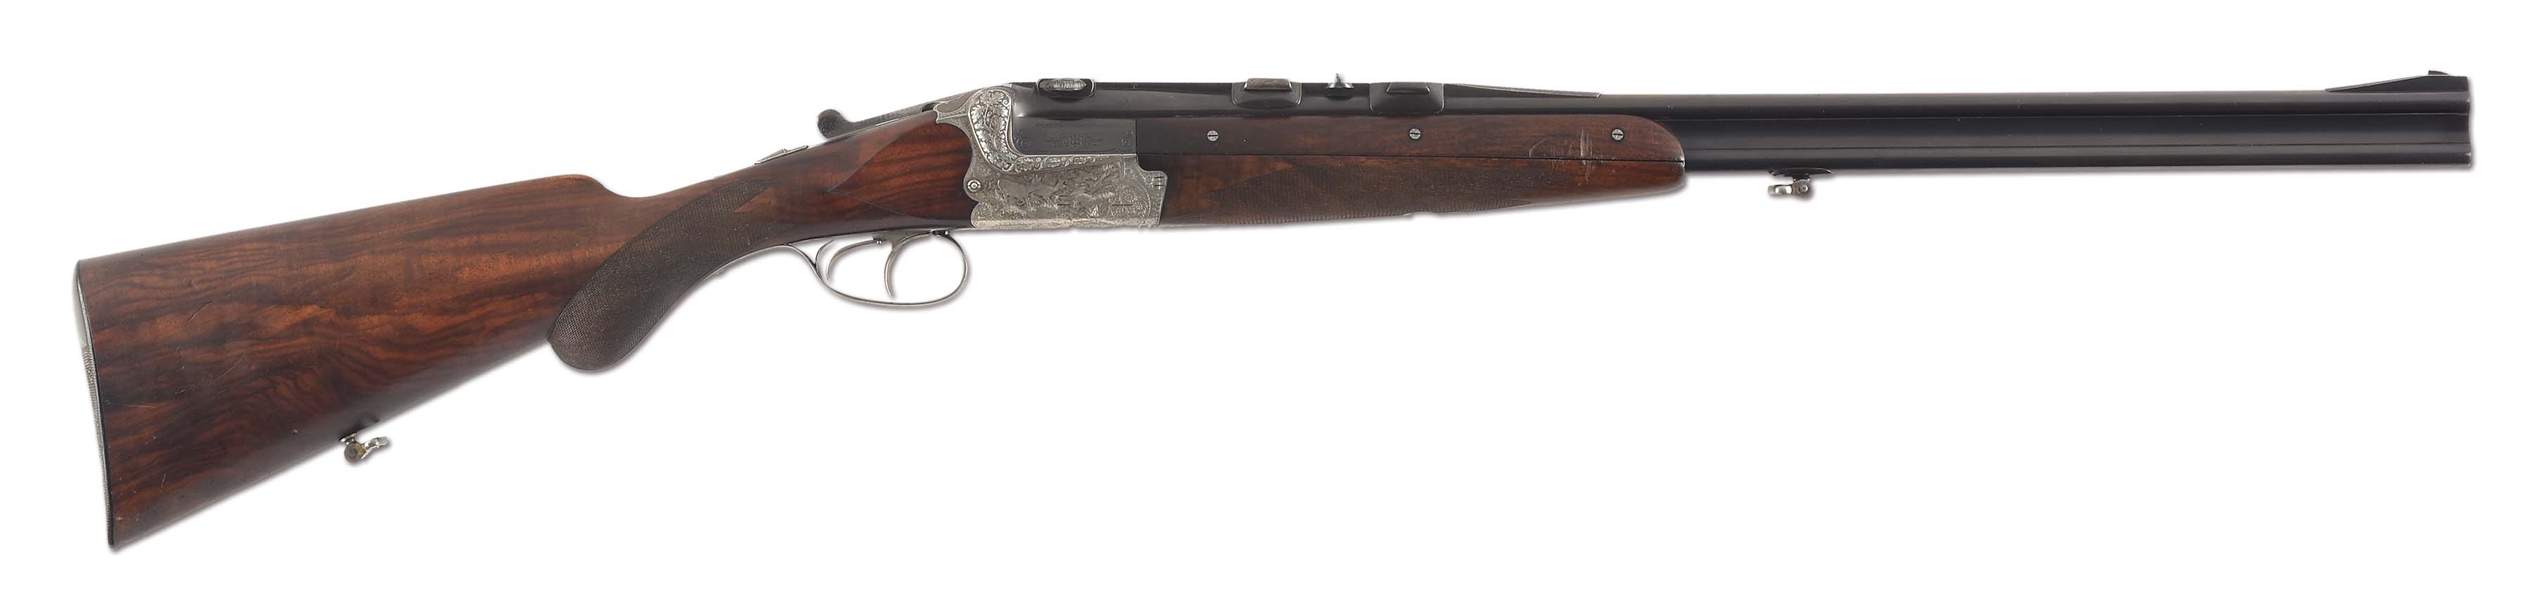 (C) HERMAN GOERING’S SUPERB MERKEL 201E OVER/UNDER BLITZ EJECTOR DOUBLE RIFLE WITH EXTRA RIFLE/SHOTGUN AND DOUBLE SHOTGUN BARRELS, THREE SCOPES, IRONCLAD PROVENANCE, AND ORIGINAL CASE.